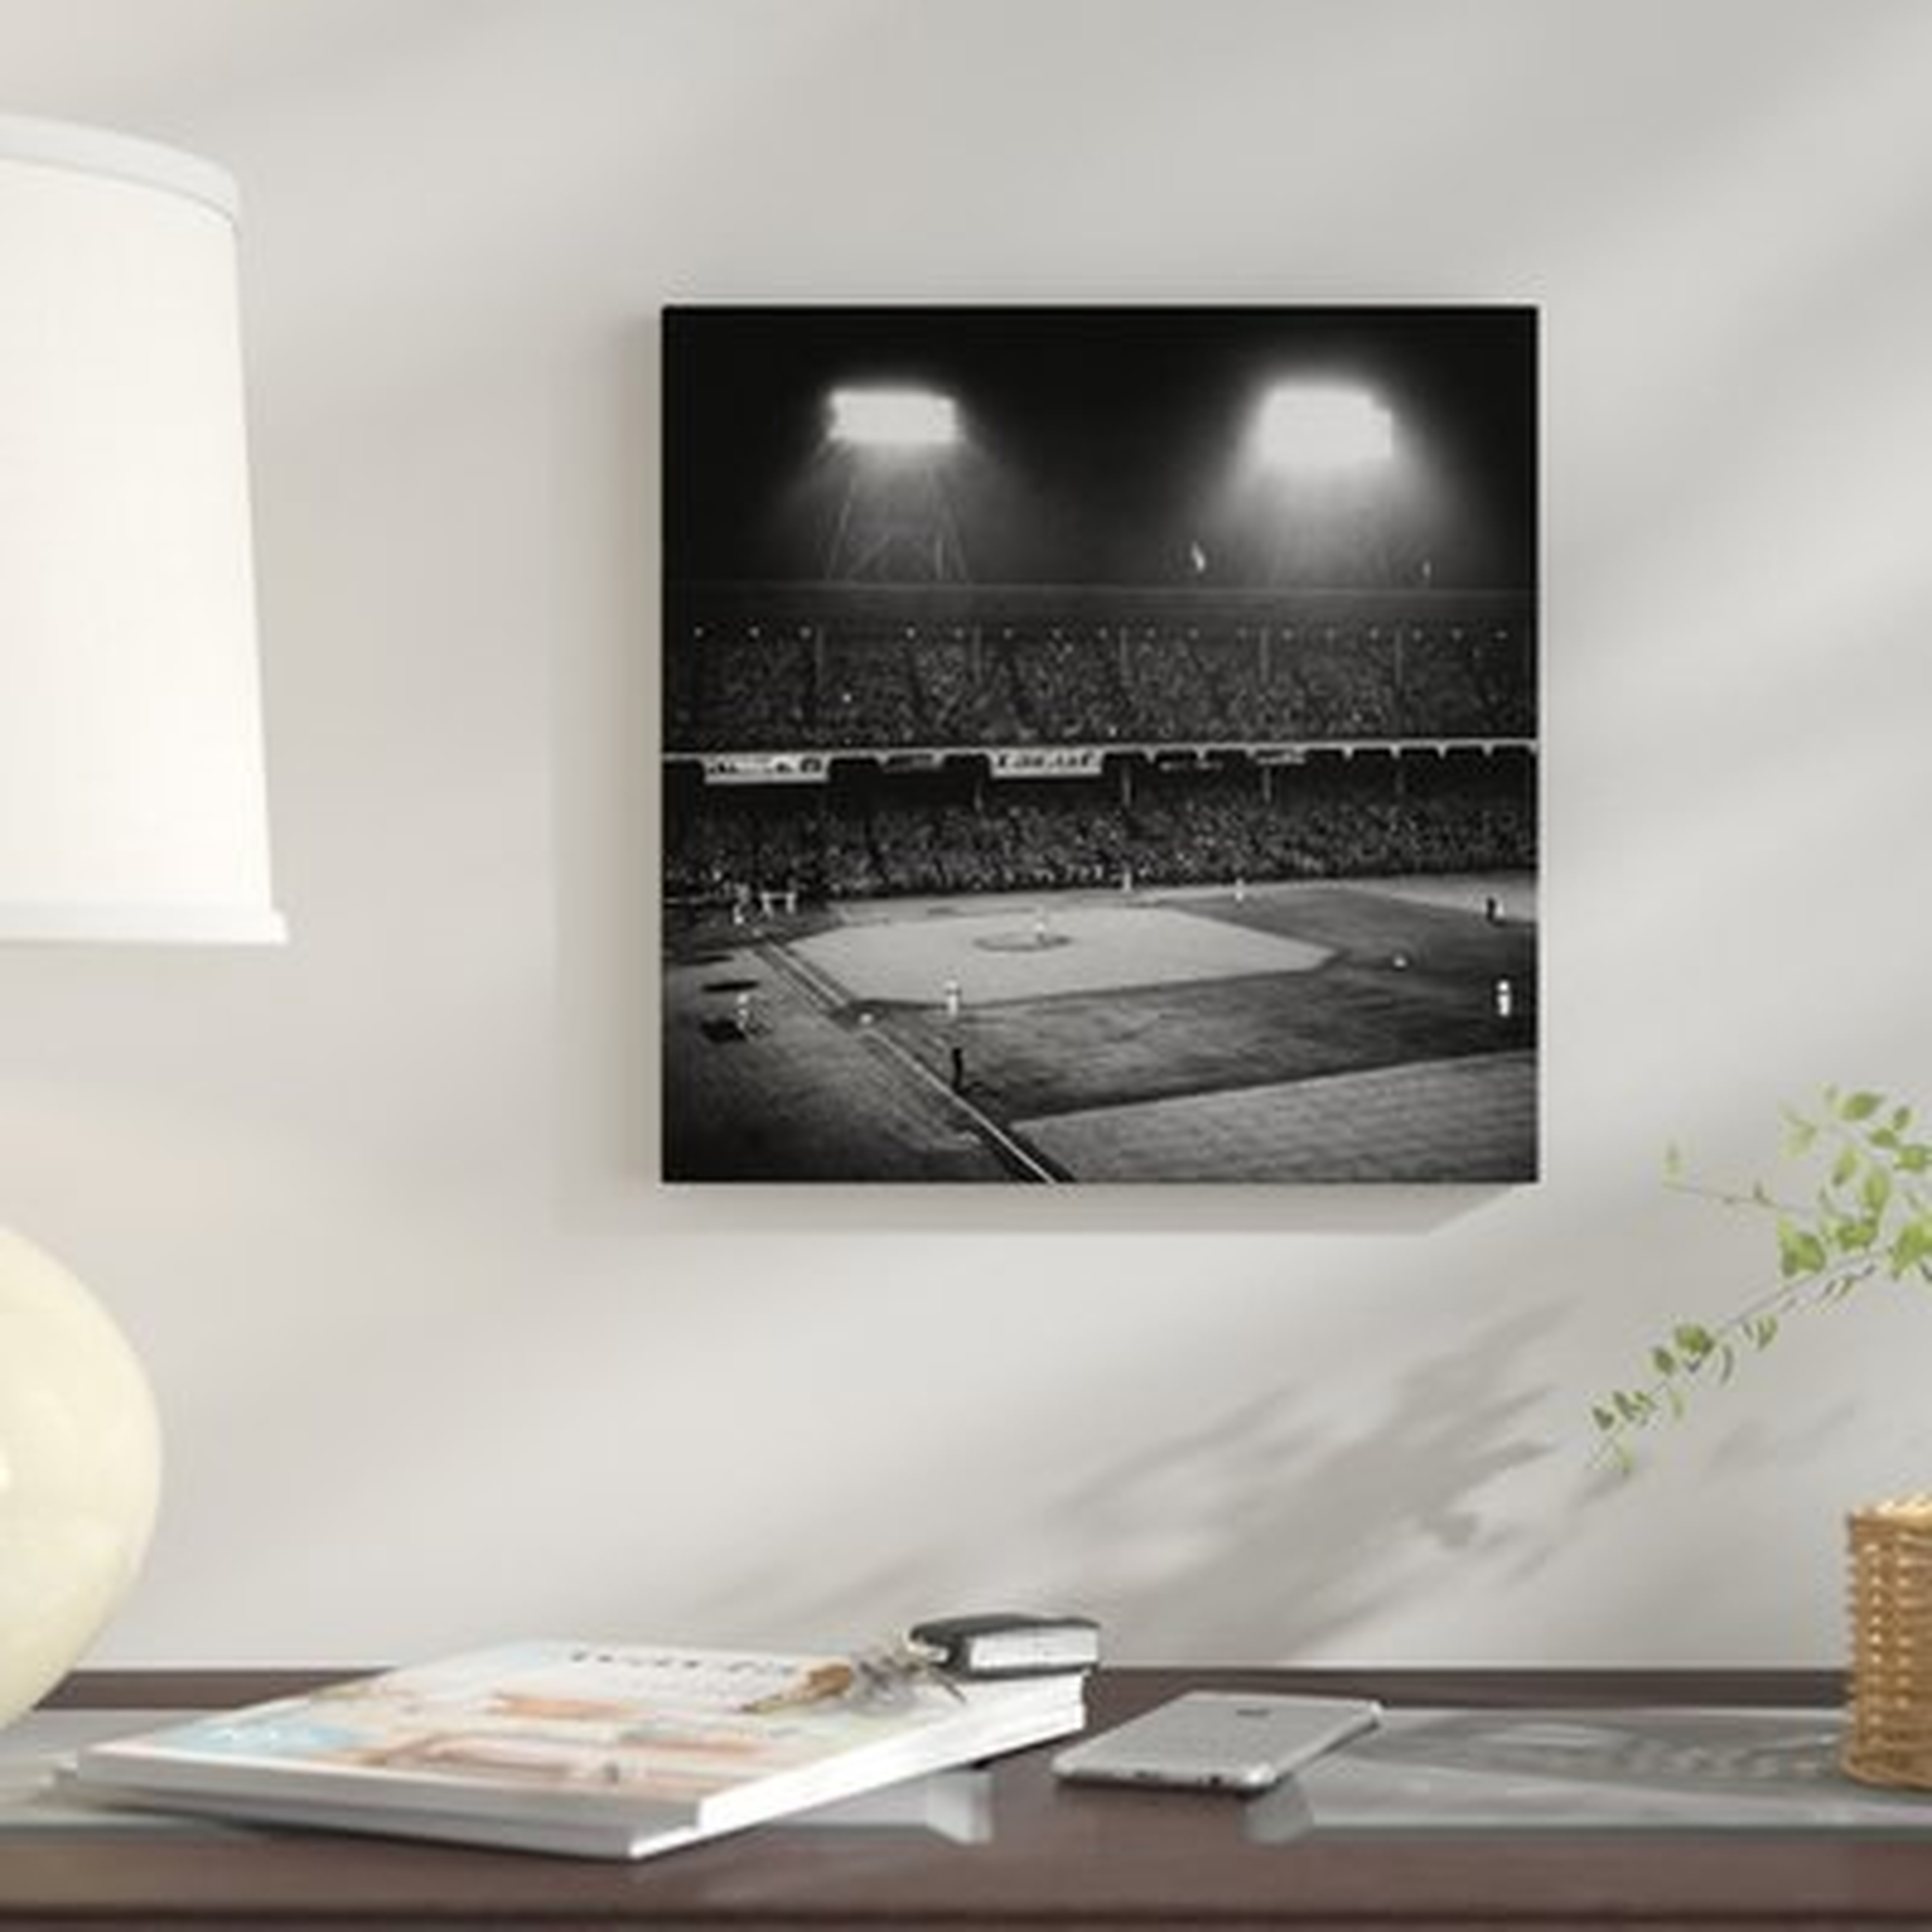 '1947 Baseball Night Game Under the Lights Players Standing for National Anthem Ebbets Field Brooklyn New York USA' Photographic Print on Wrapped Canvas - Wayfair